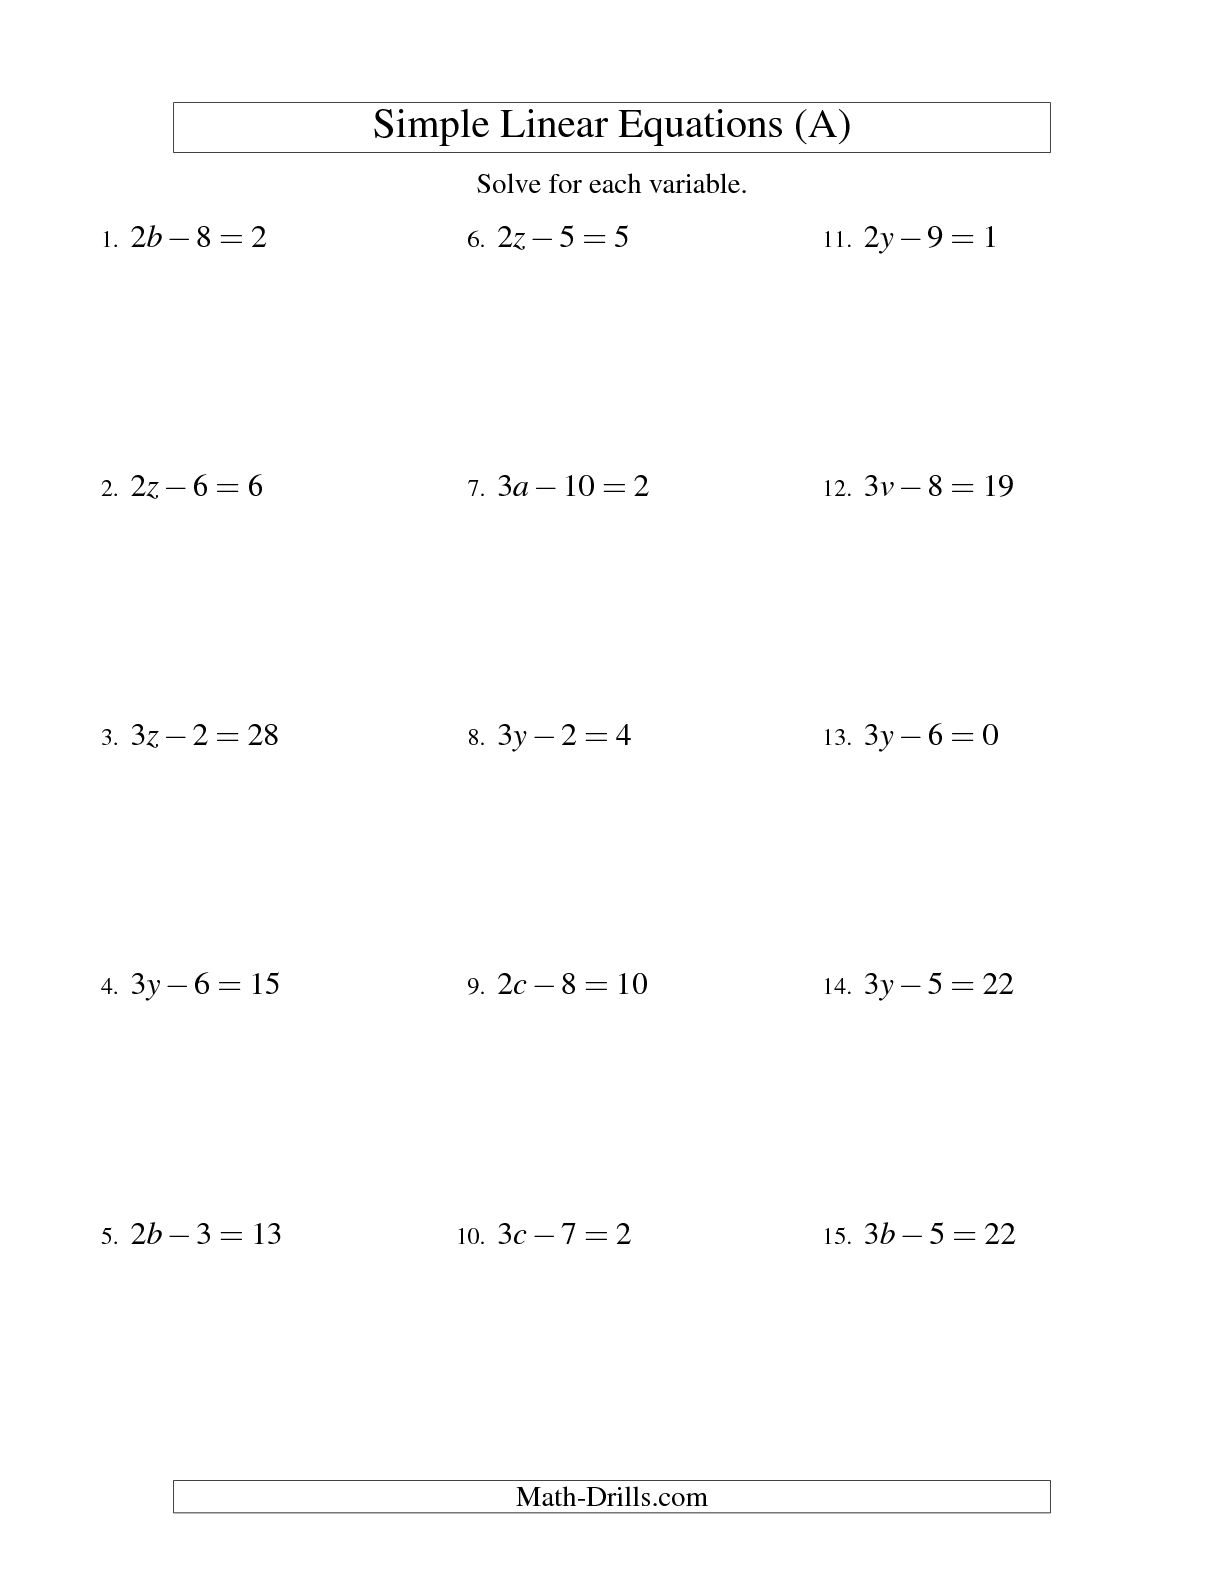 solving-one-step-equations-multiplication-and-division-worksheet-answers-times-tables-worksheets